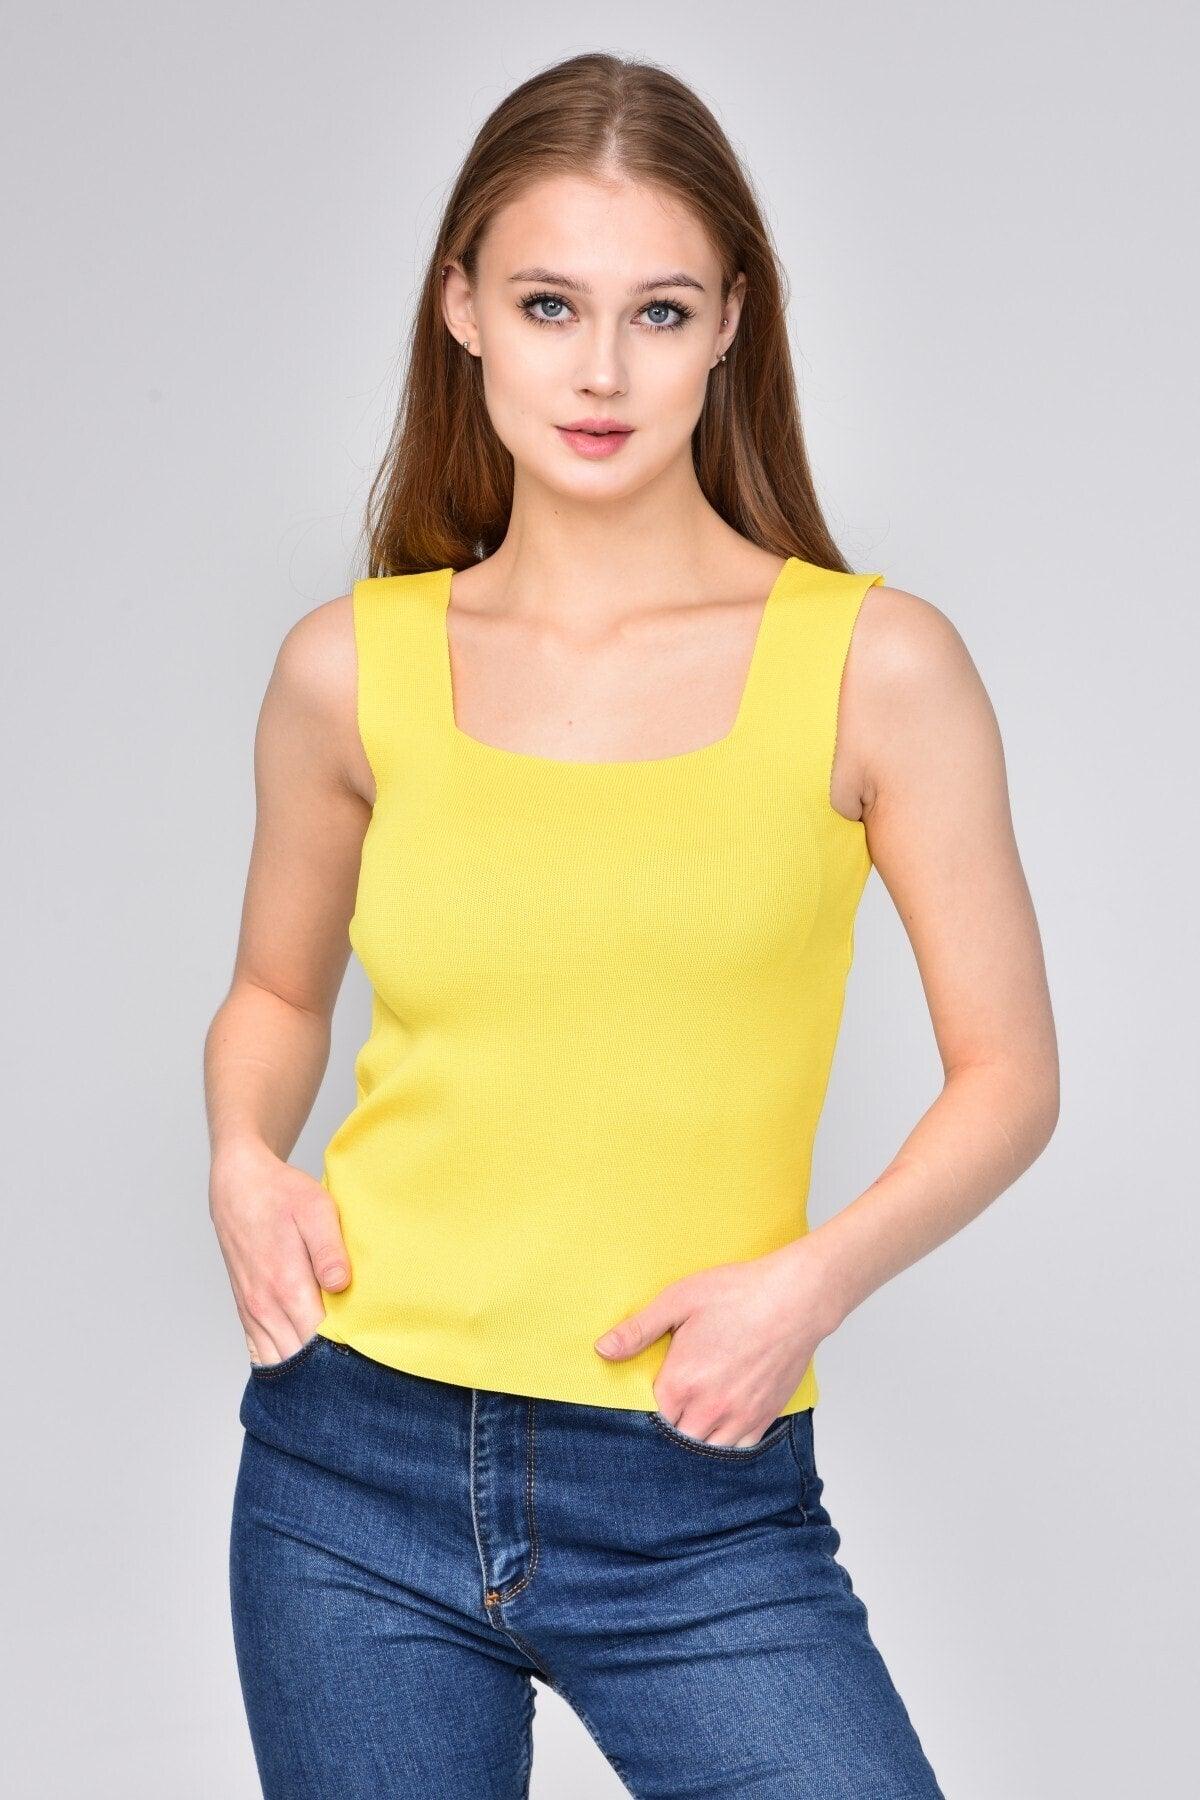 Women's Yellow Thick Strap Square Collar Summer Athlete Knitwear Blouse - Swordslife